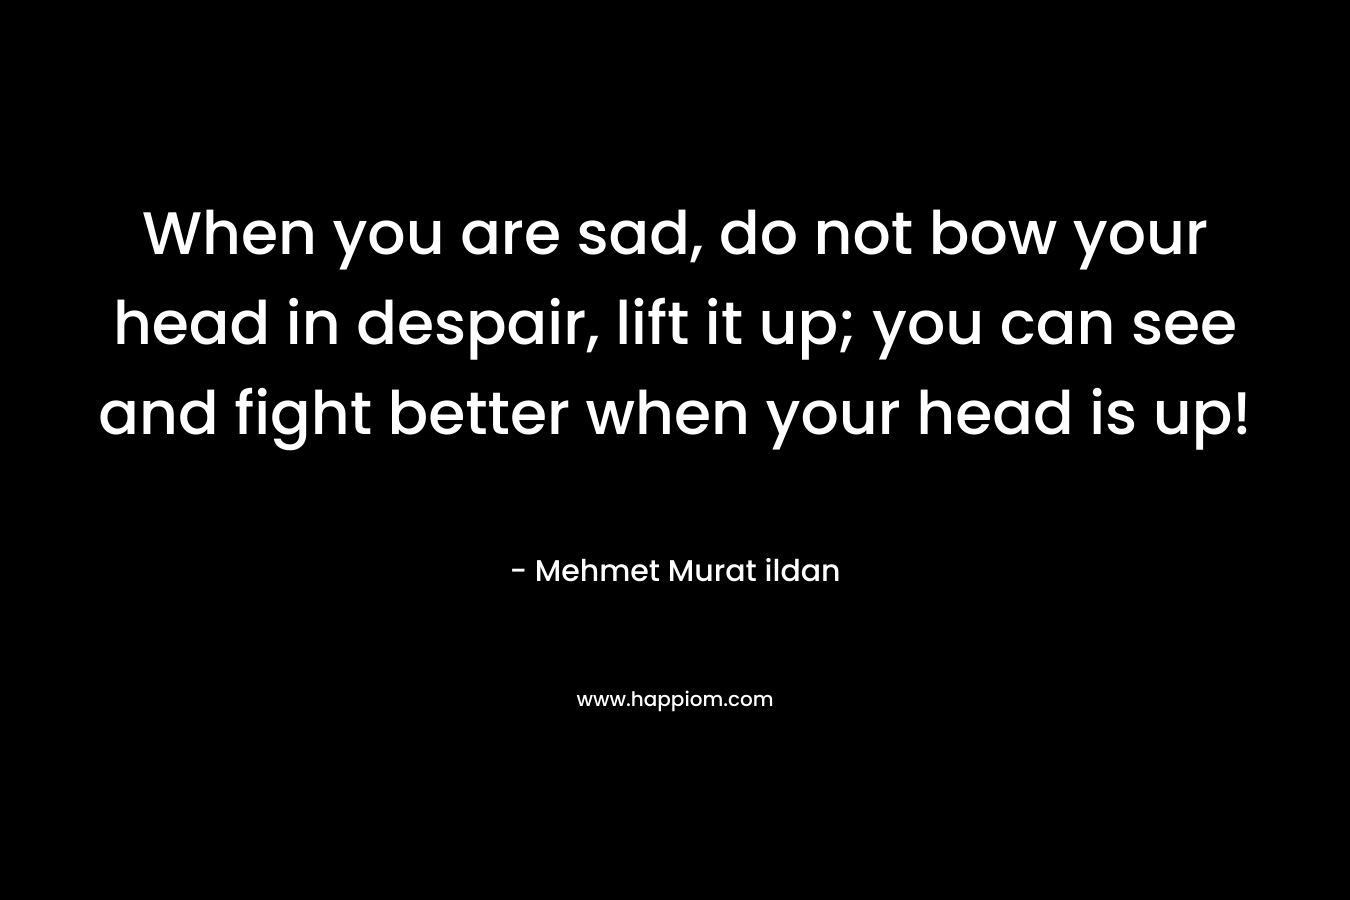 When you are sad, do not bow your head in despair, lift it up; you can see and fight better when your head is up!